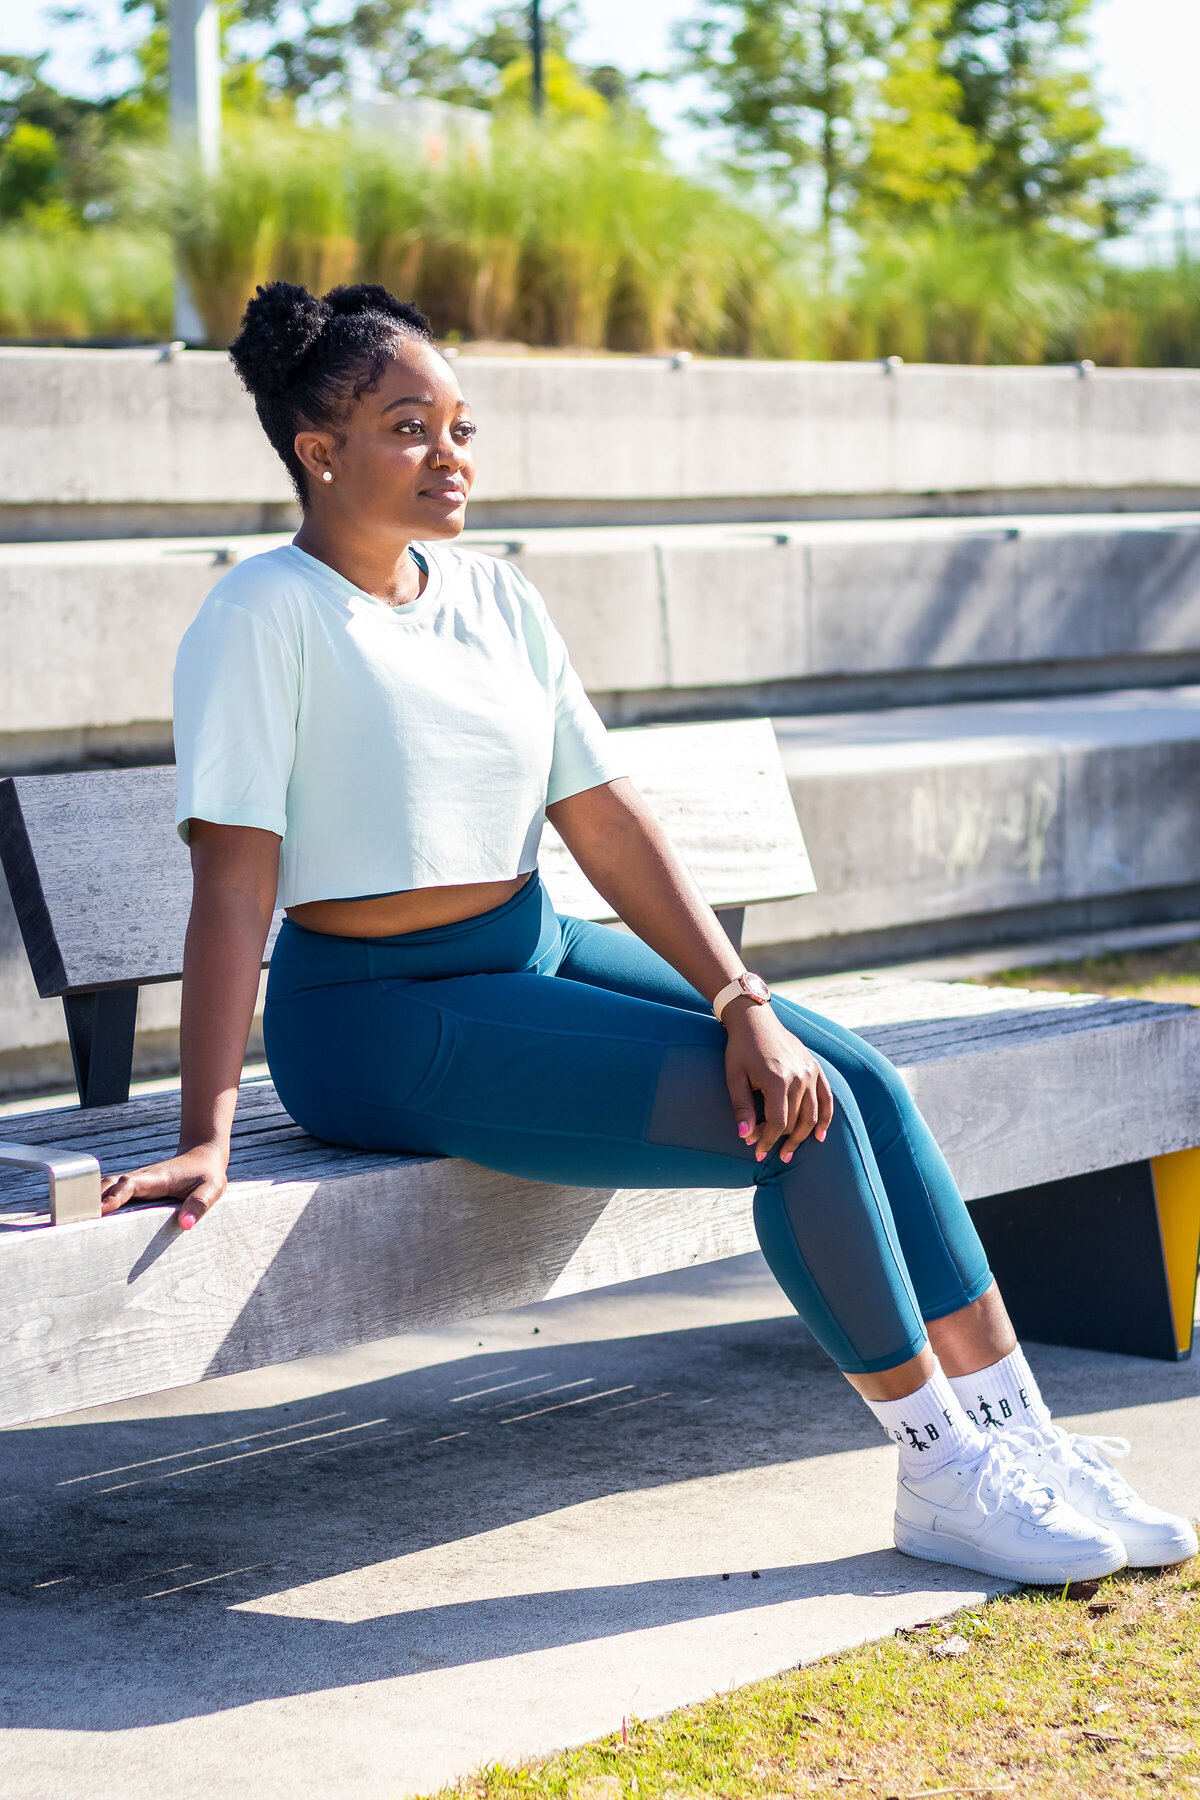 delicia_tampa_austin_fitness_fabletics_wellness_branding_brand_photography-03